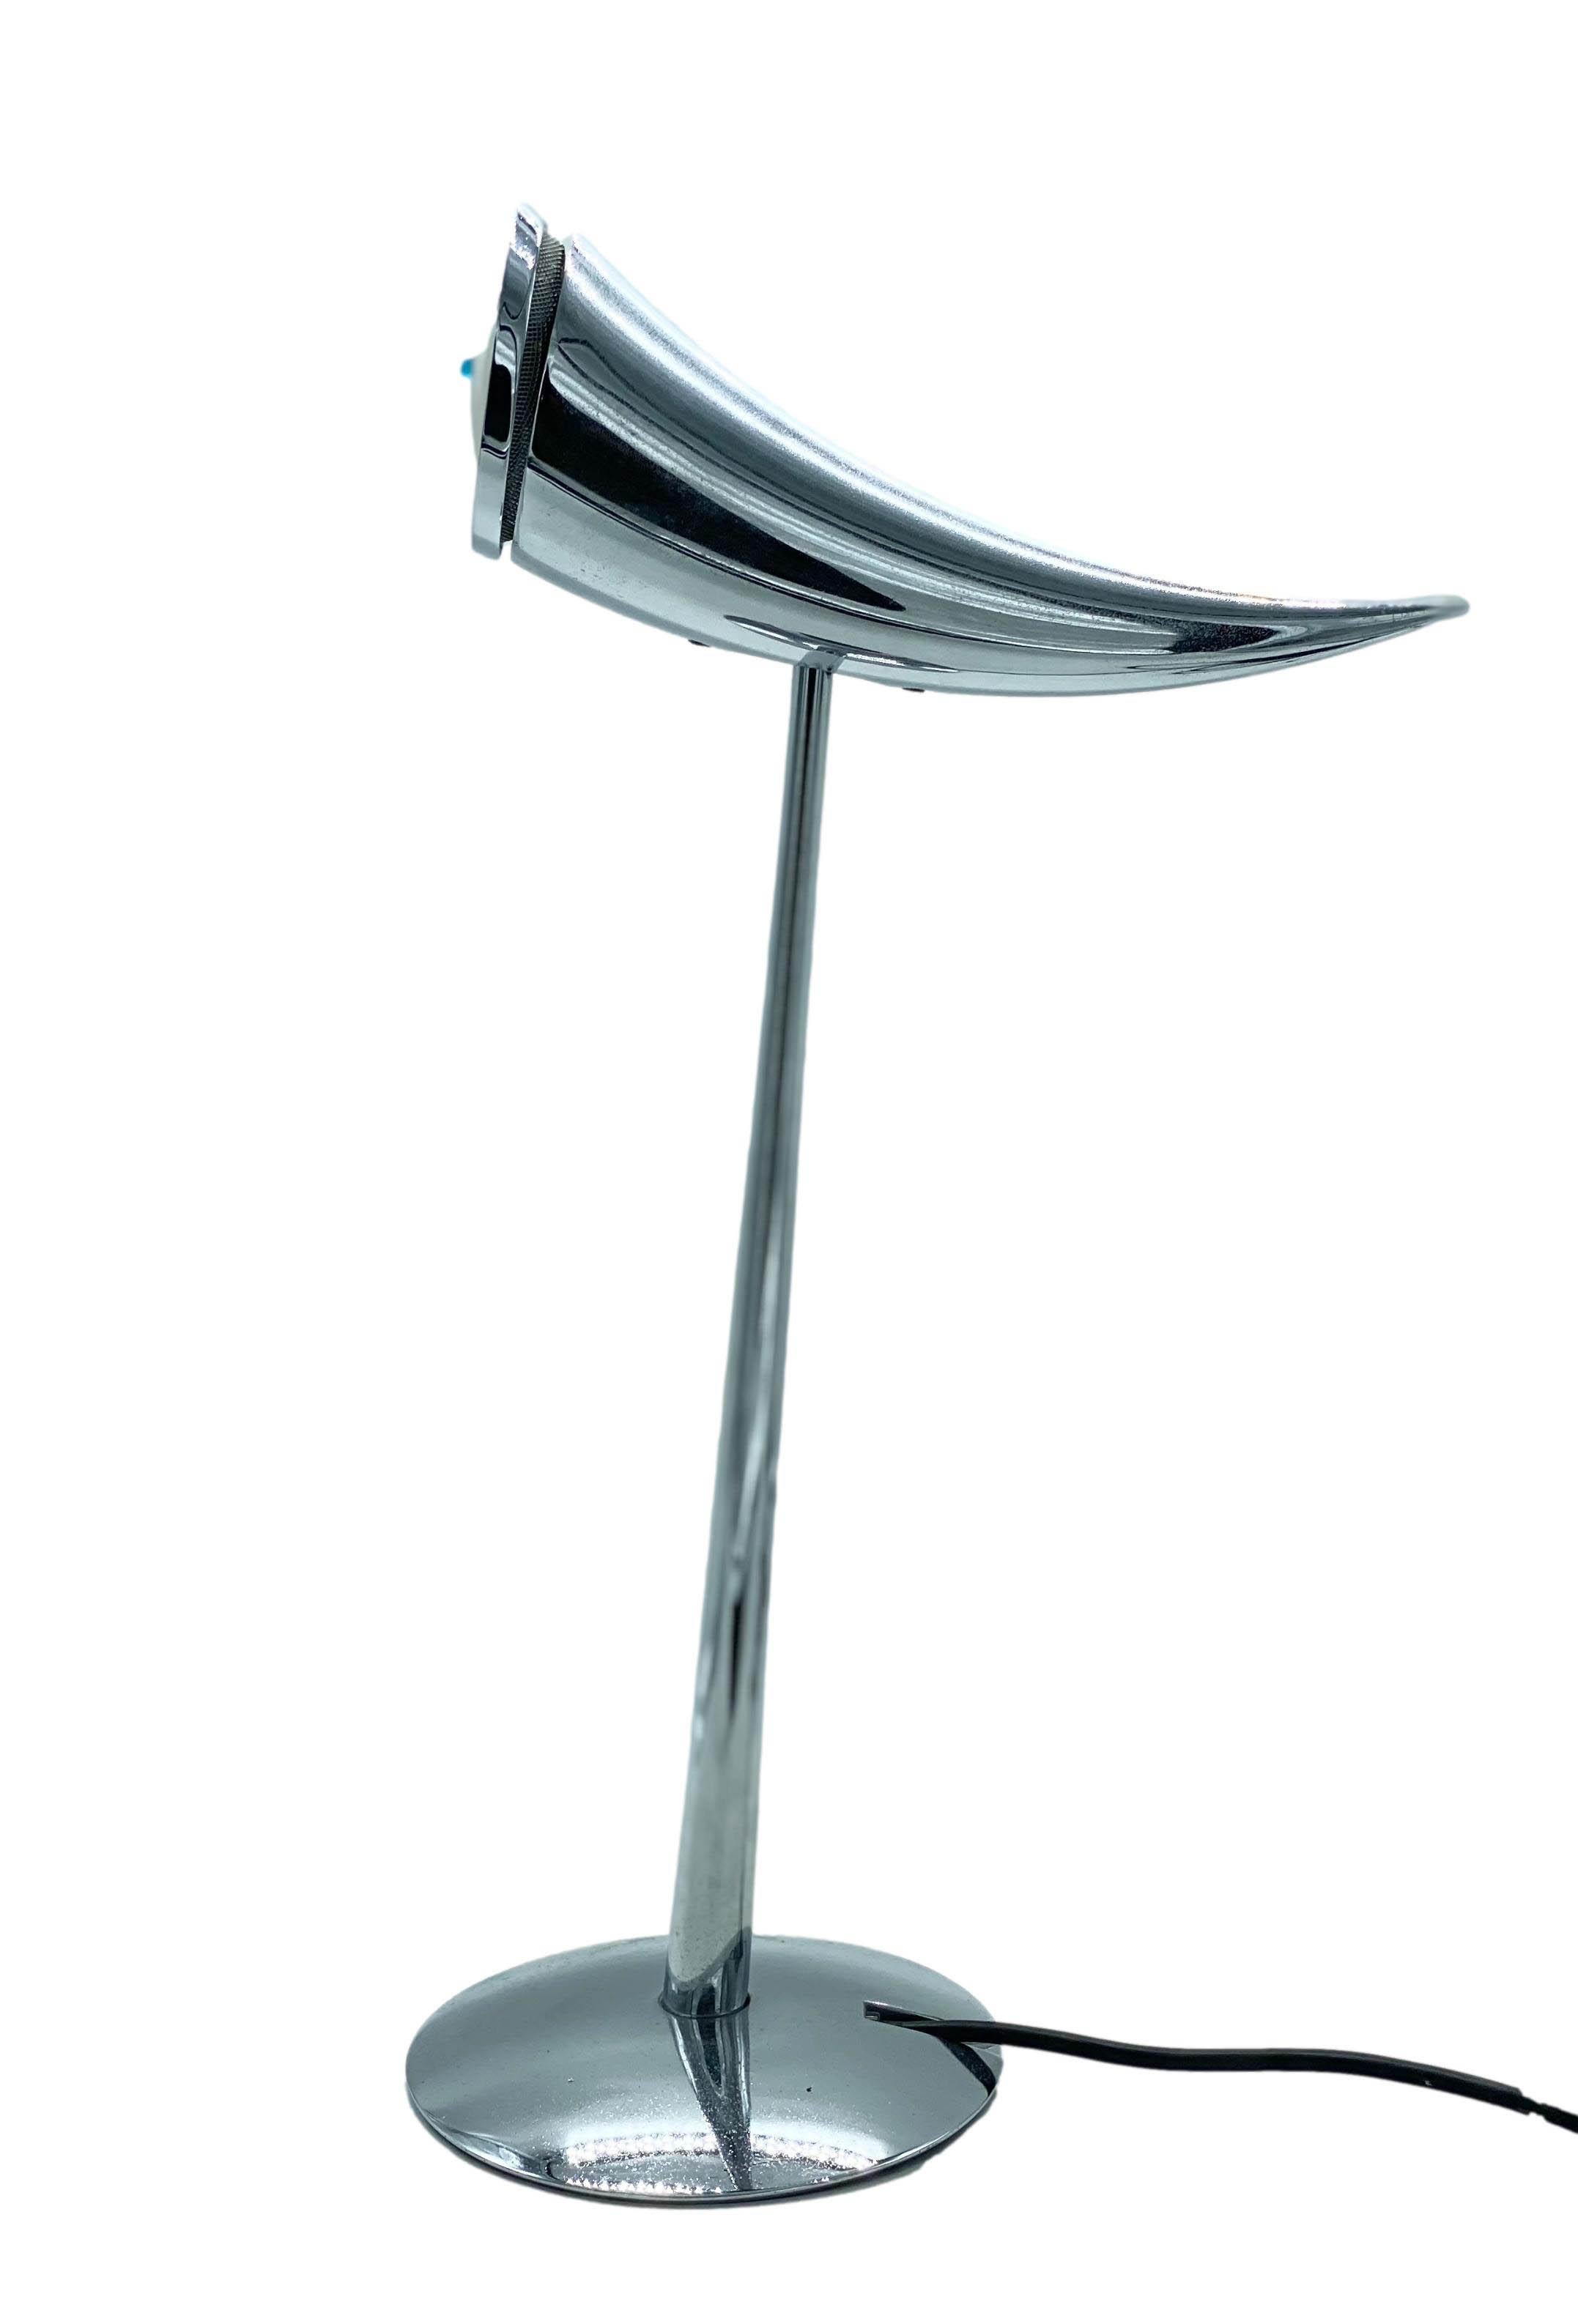 Elegant Ara table lamp designed by Philippe Starck and produced by Flos Italia in 1988. The lamp is in very good working condition. If you tilt the top of the lamp upwards, the light goes out. If you tilt it downwards, the light comes on.